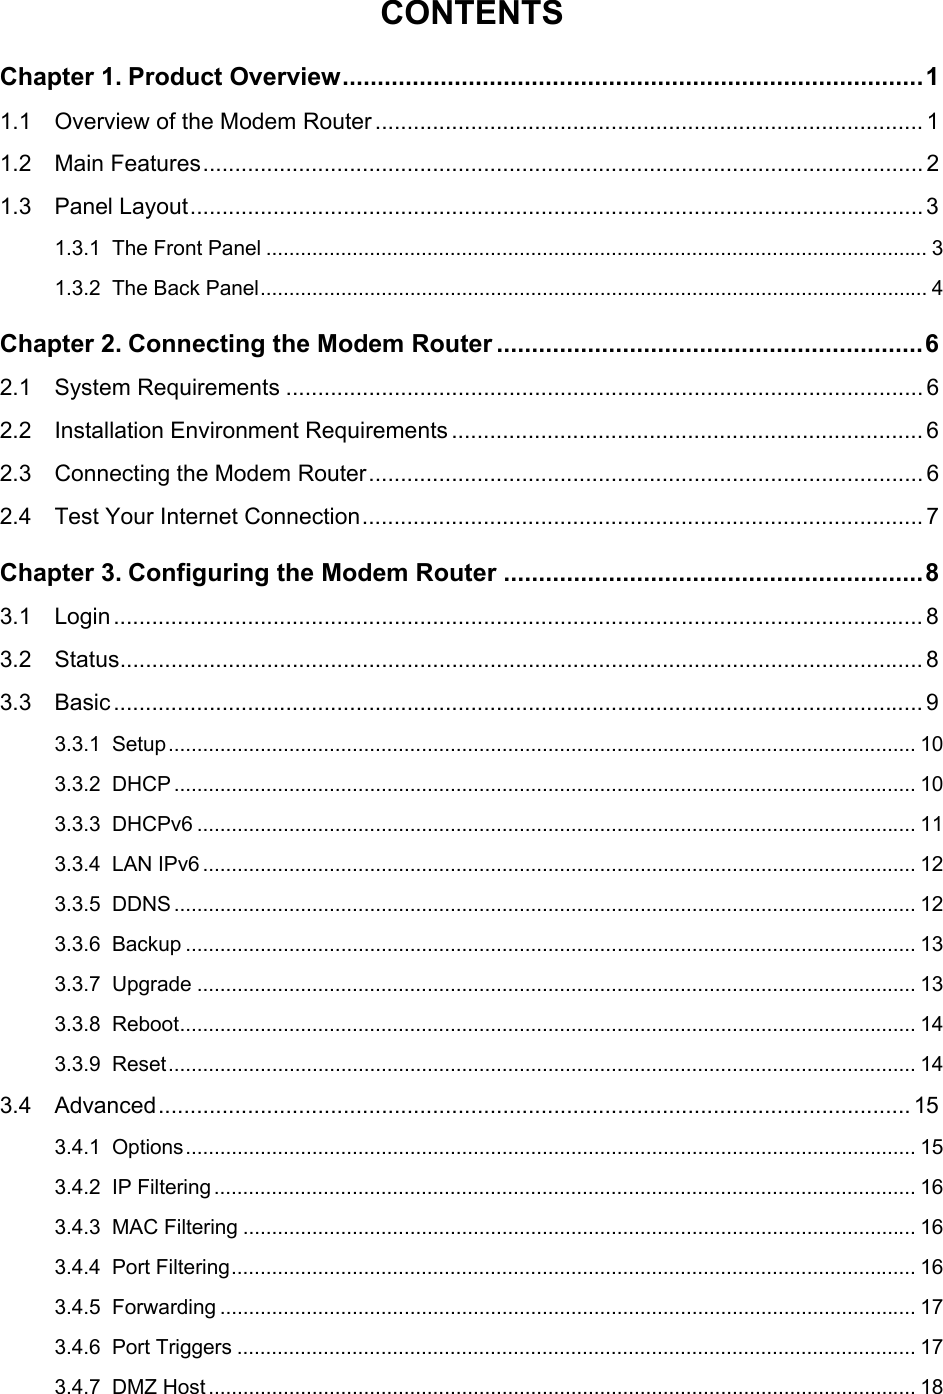  CONTENTS Chapter 1. Product Overview...................................................................................1 1.1 Overview of the Modem Router ...................................................................................... 1 1.2 Main Features................................................................................................................. 2 1.3 Panel Layout...................................................................................................................3 1.3.1 The Front Panel ................................................................................................................... 3 1.3.2 The Back Panel.................................................................................................................... 4 Chapter 2. Connecting the Modem Router .............................................................6 2.1 System Requirements .................................................................................................... 6 2.2 Installation Environment Requirements .......................................................................... 6 2.3 Connecting the Modem Router.......................................................................................6 2.4 Test Your Internet Connection........................................................................................ 7 Chapter 3. Configuring the Modem Router ............................................................8 3.1 Login ............................................................................................................................... 8 3.2 Status.............................................................................................................................. 8 3.3 Basic ............................................................................................................................... 9 3.3.1 Setup.................................................................................................................................. 10 3.3.2 DHCP ................................................................................................................................. 10 3.3.3 DHCPv6 ............................................................................................................................. 11 3.3.4 LAN IPv6 ............................................................................................................................ 12 3.3.5 DDNS ................................................................................................................................. 12 3.3.6 Backup ............................................................................................................................... 13 3.3.7 Upgrade ............................................................................................................................. 13 3.3.8 Reboot................................................................................................................................ 14 3.3.9 Reset.................................................................................................................................. 14 3.4 Advanced...................................................................................................................... 15 3.4.1 Options............................................................................................................................... 15 3.4.2 IP Filtering.......................................................................................................................... 16 3.4.3 MAC Filtering ..................................................................................................................... 16 3.4.4 Port Filtering....................................................................................................................... 16 3.4.5 Forwarding ......................................................................................................................... 17 3.4.6 Port Triggers ...................................................................................................................... 17 3.4.7 DMZ Host........................................................................................................................... 18  